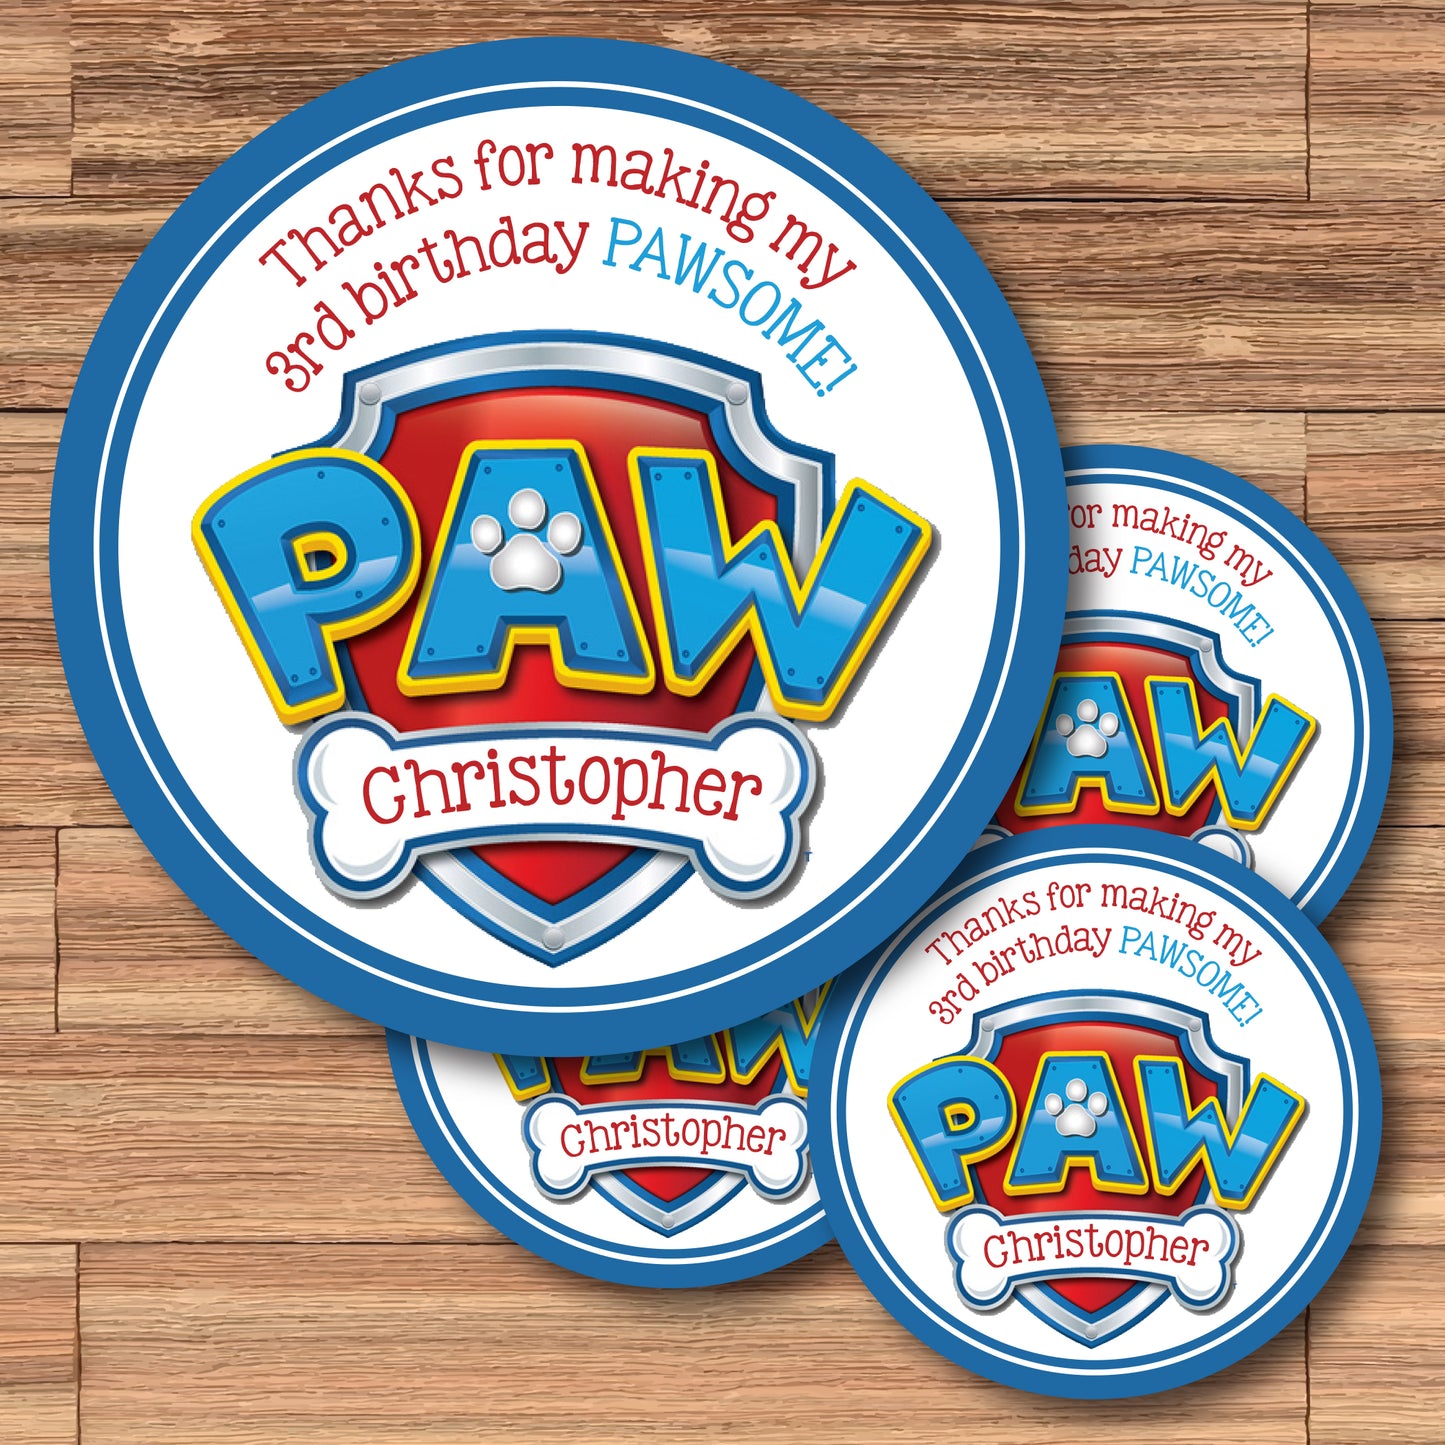 PAW PATROL Shield Printed or Digital Custom Birthday Party Stickers for Gift Bags, Party Favors!